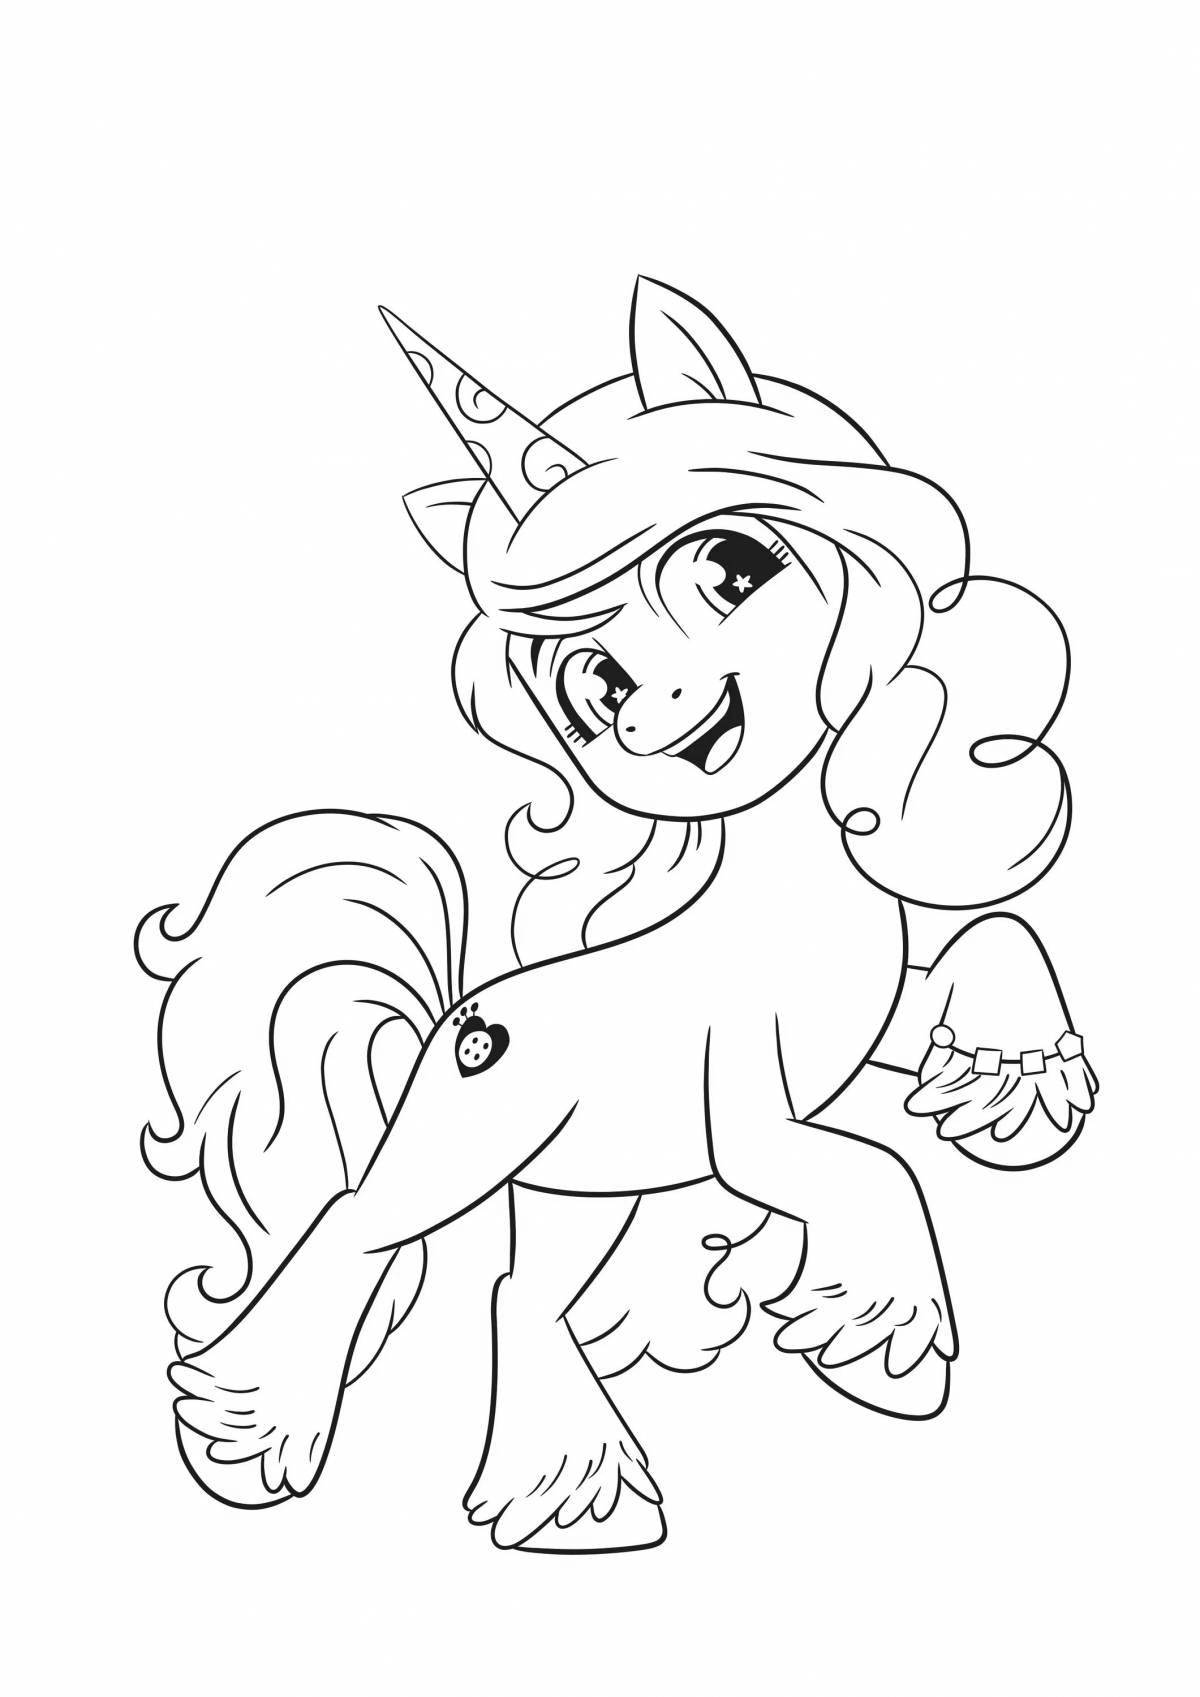 New generation shiny little pony coloring pages